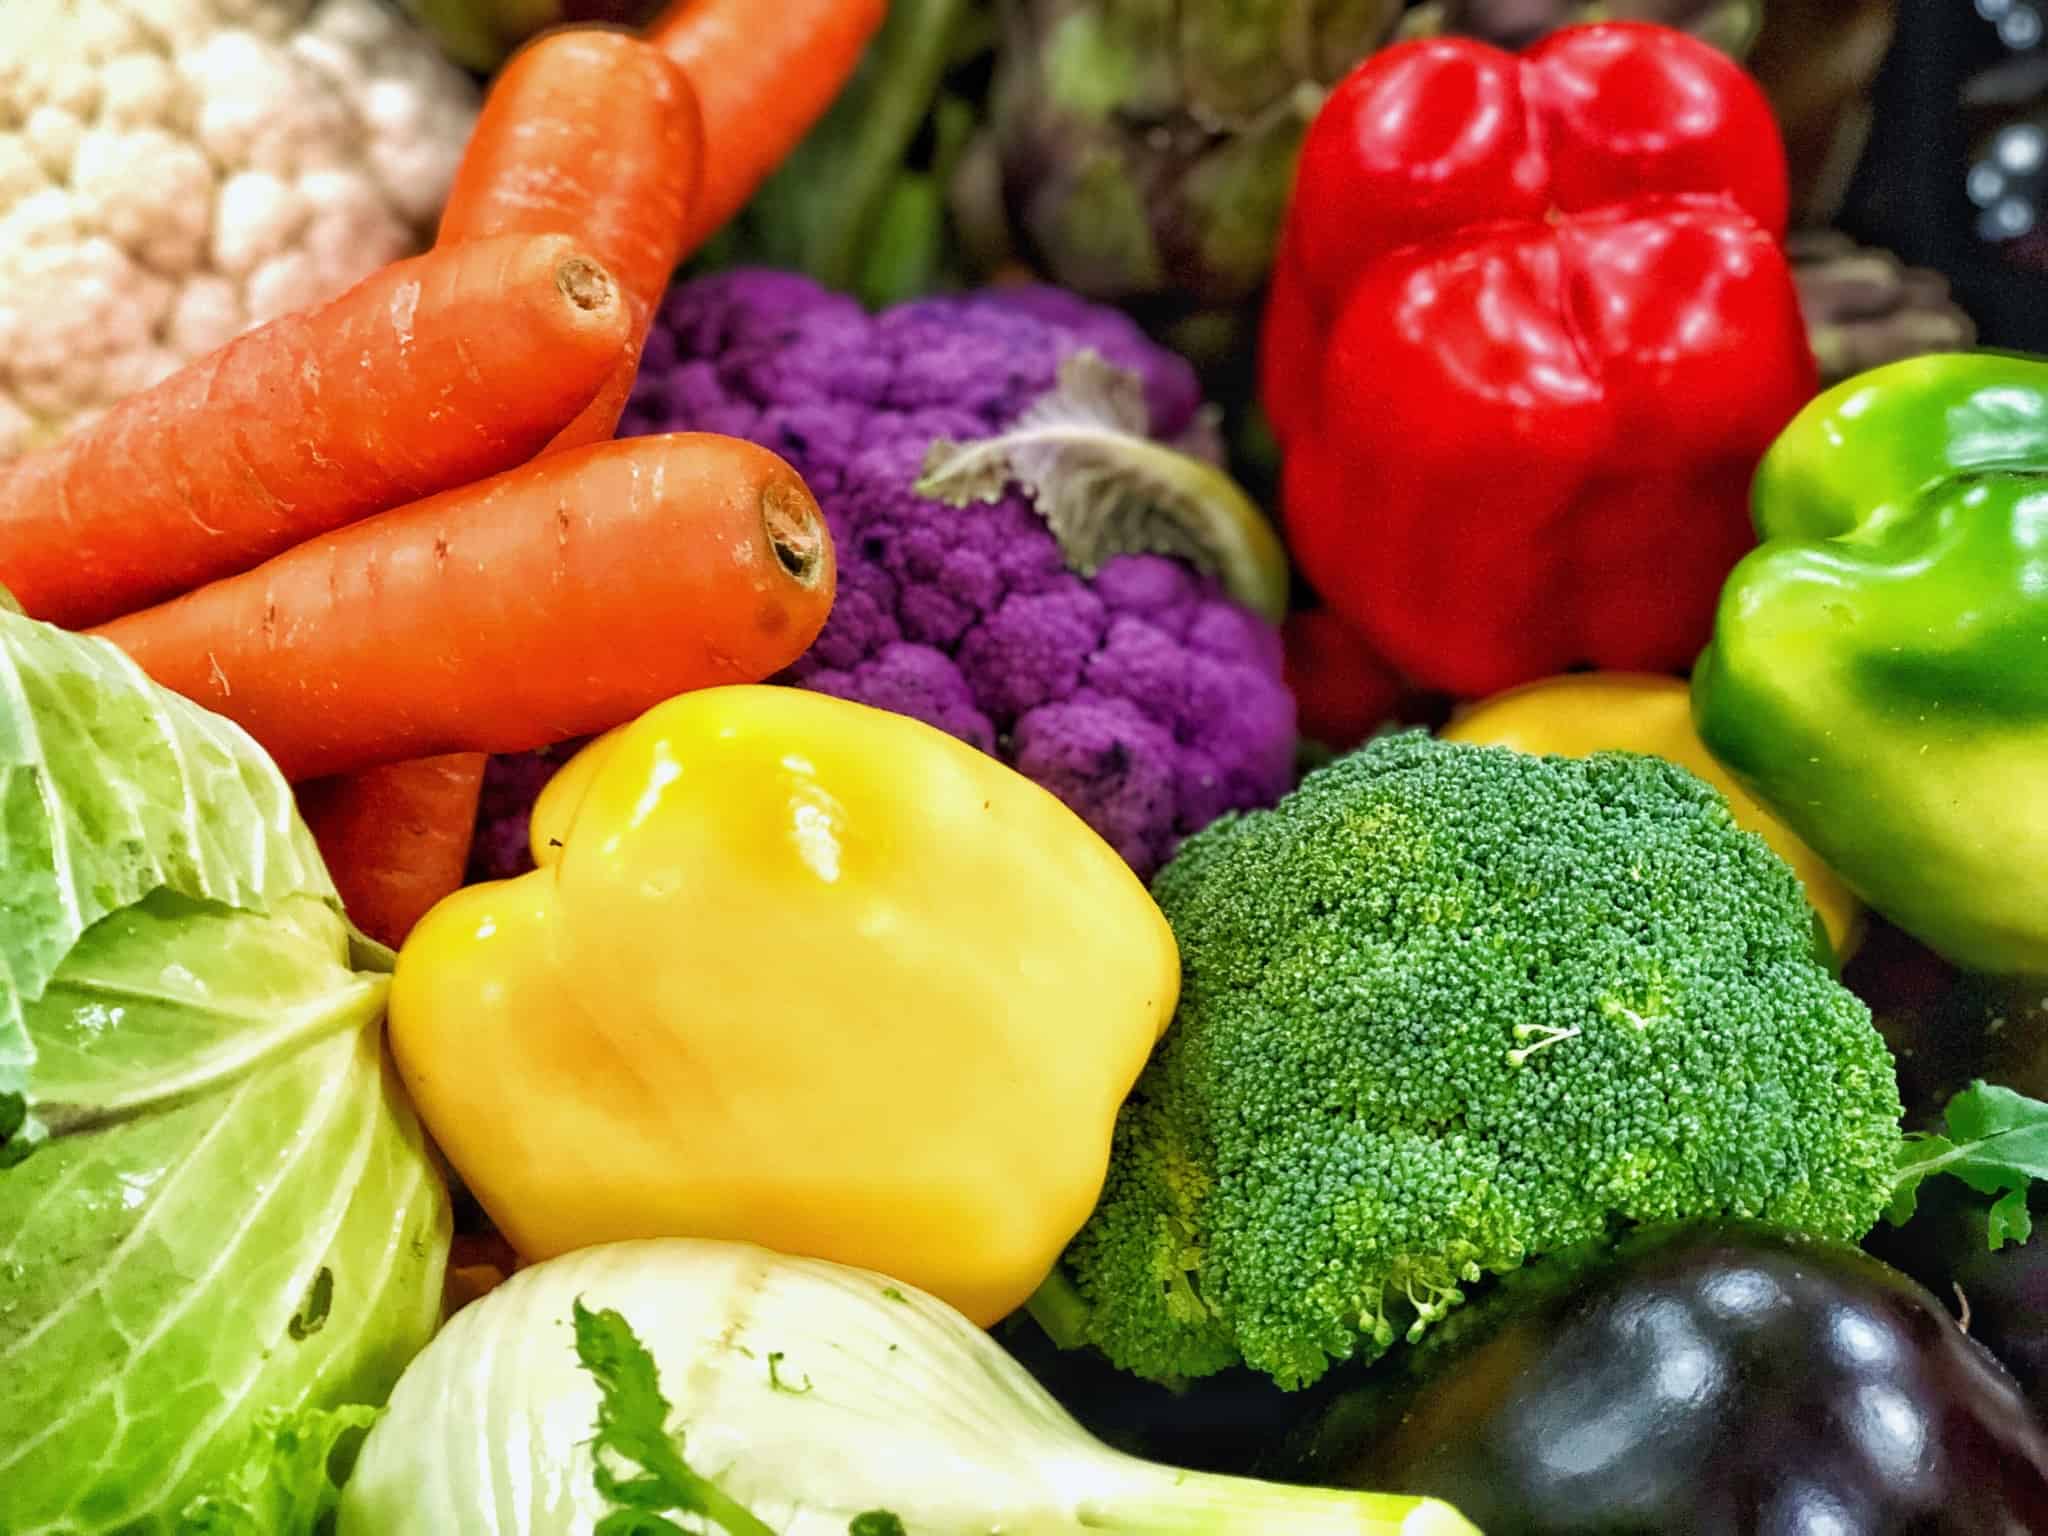 Various vegetables arranged such as carrots, peppers, broccoli, kale